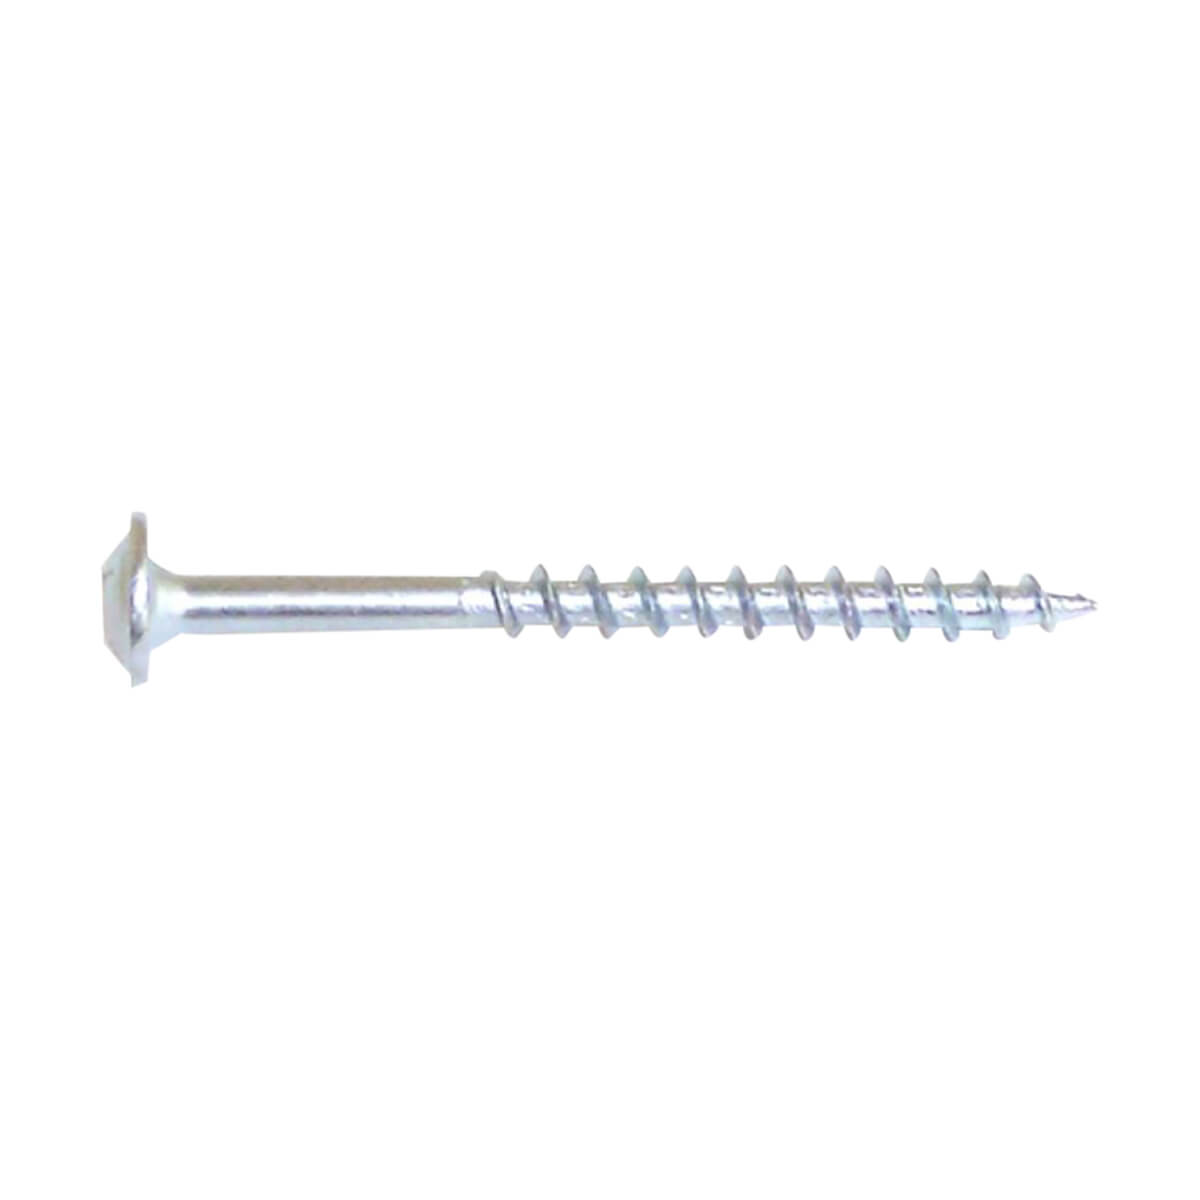 Pan-Head with Washer Pocket Screws - #8 X 2-in - 100 / Box